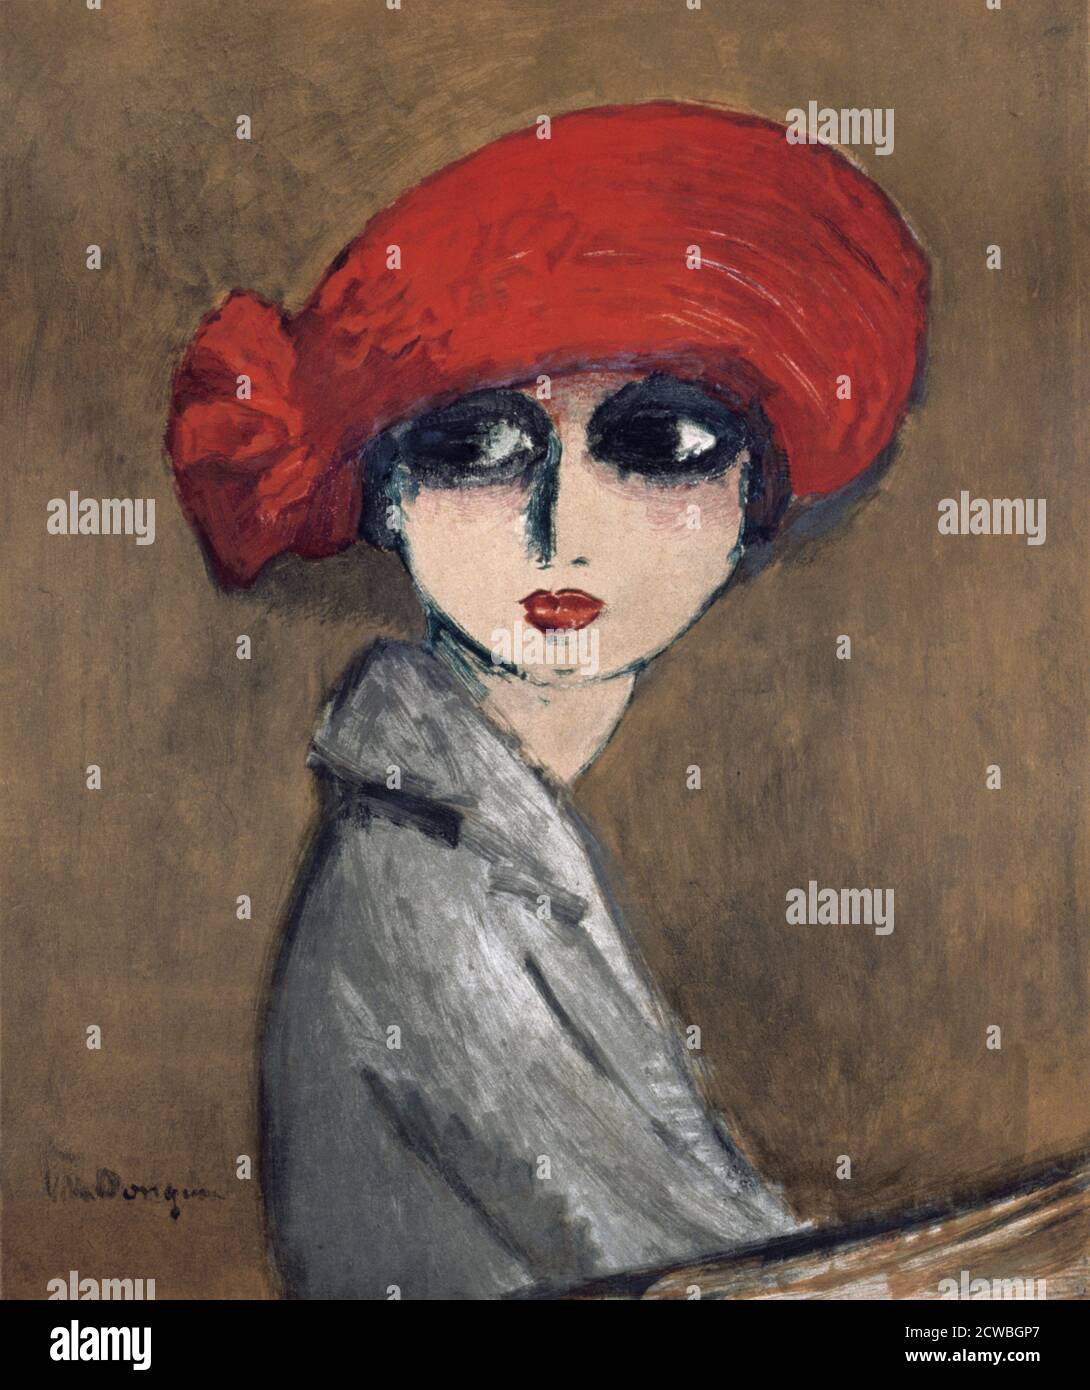 The Corn Poppy by Kees van Dongen. 1919. This Fauvist artwork has thick brush strokes with a complimentary muddy background and the figure as the focal point. Cornelis Theodorus Maria 'Kees' van Dongen (26 January 1877 - 28 May 1968) was a Dutch-French painter who was one of the leading Fauves. Stock Photo